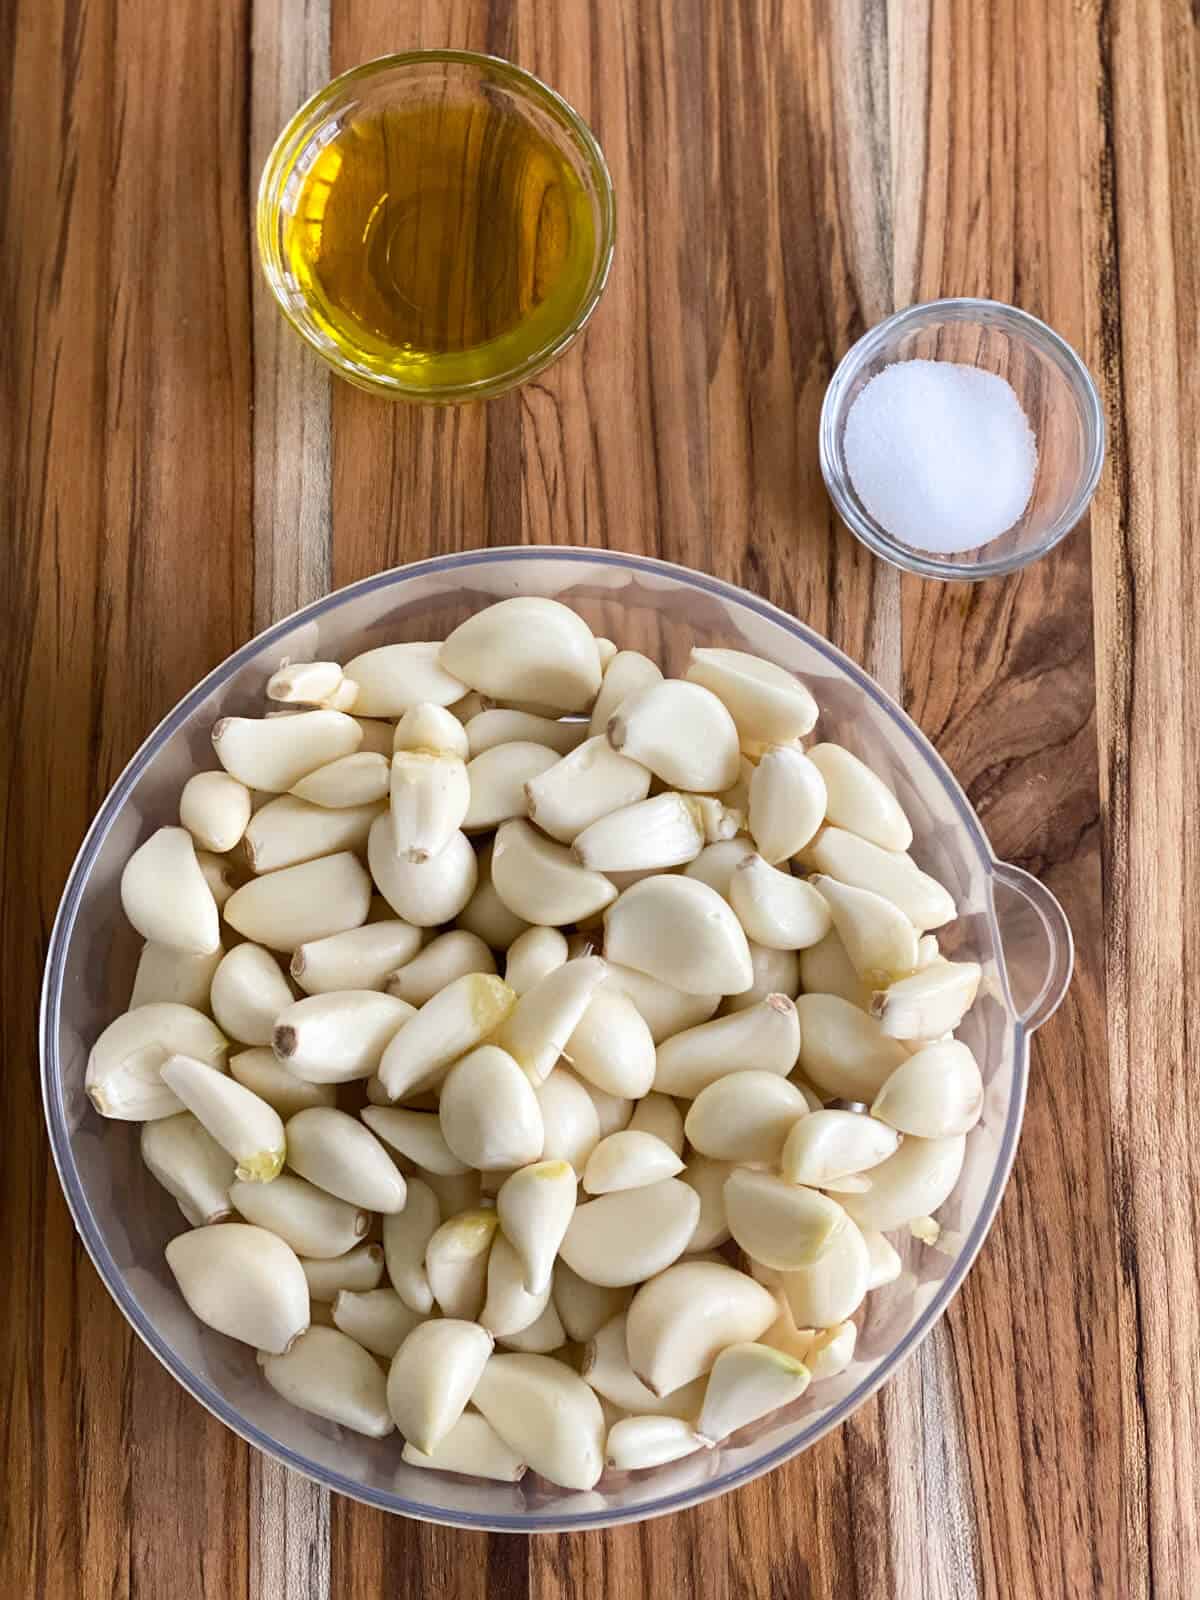 The ingredients needed to make garlic paste. Includes garlic cloves, oil, and salt.